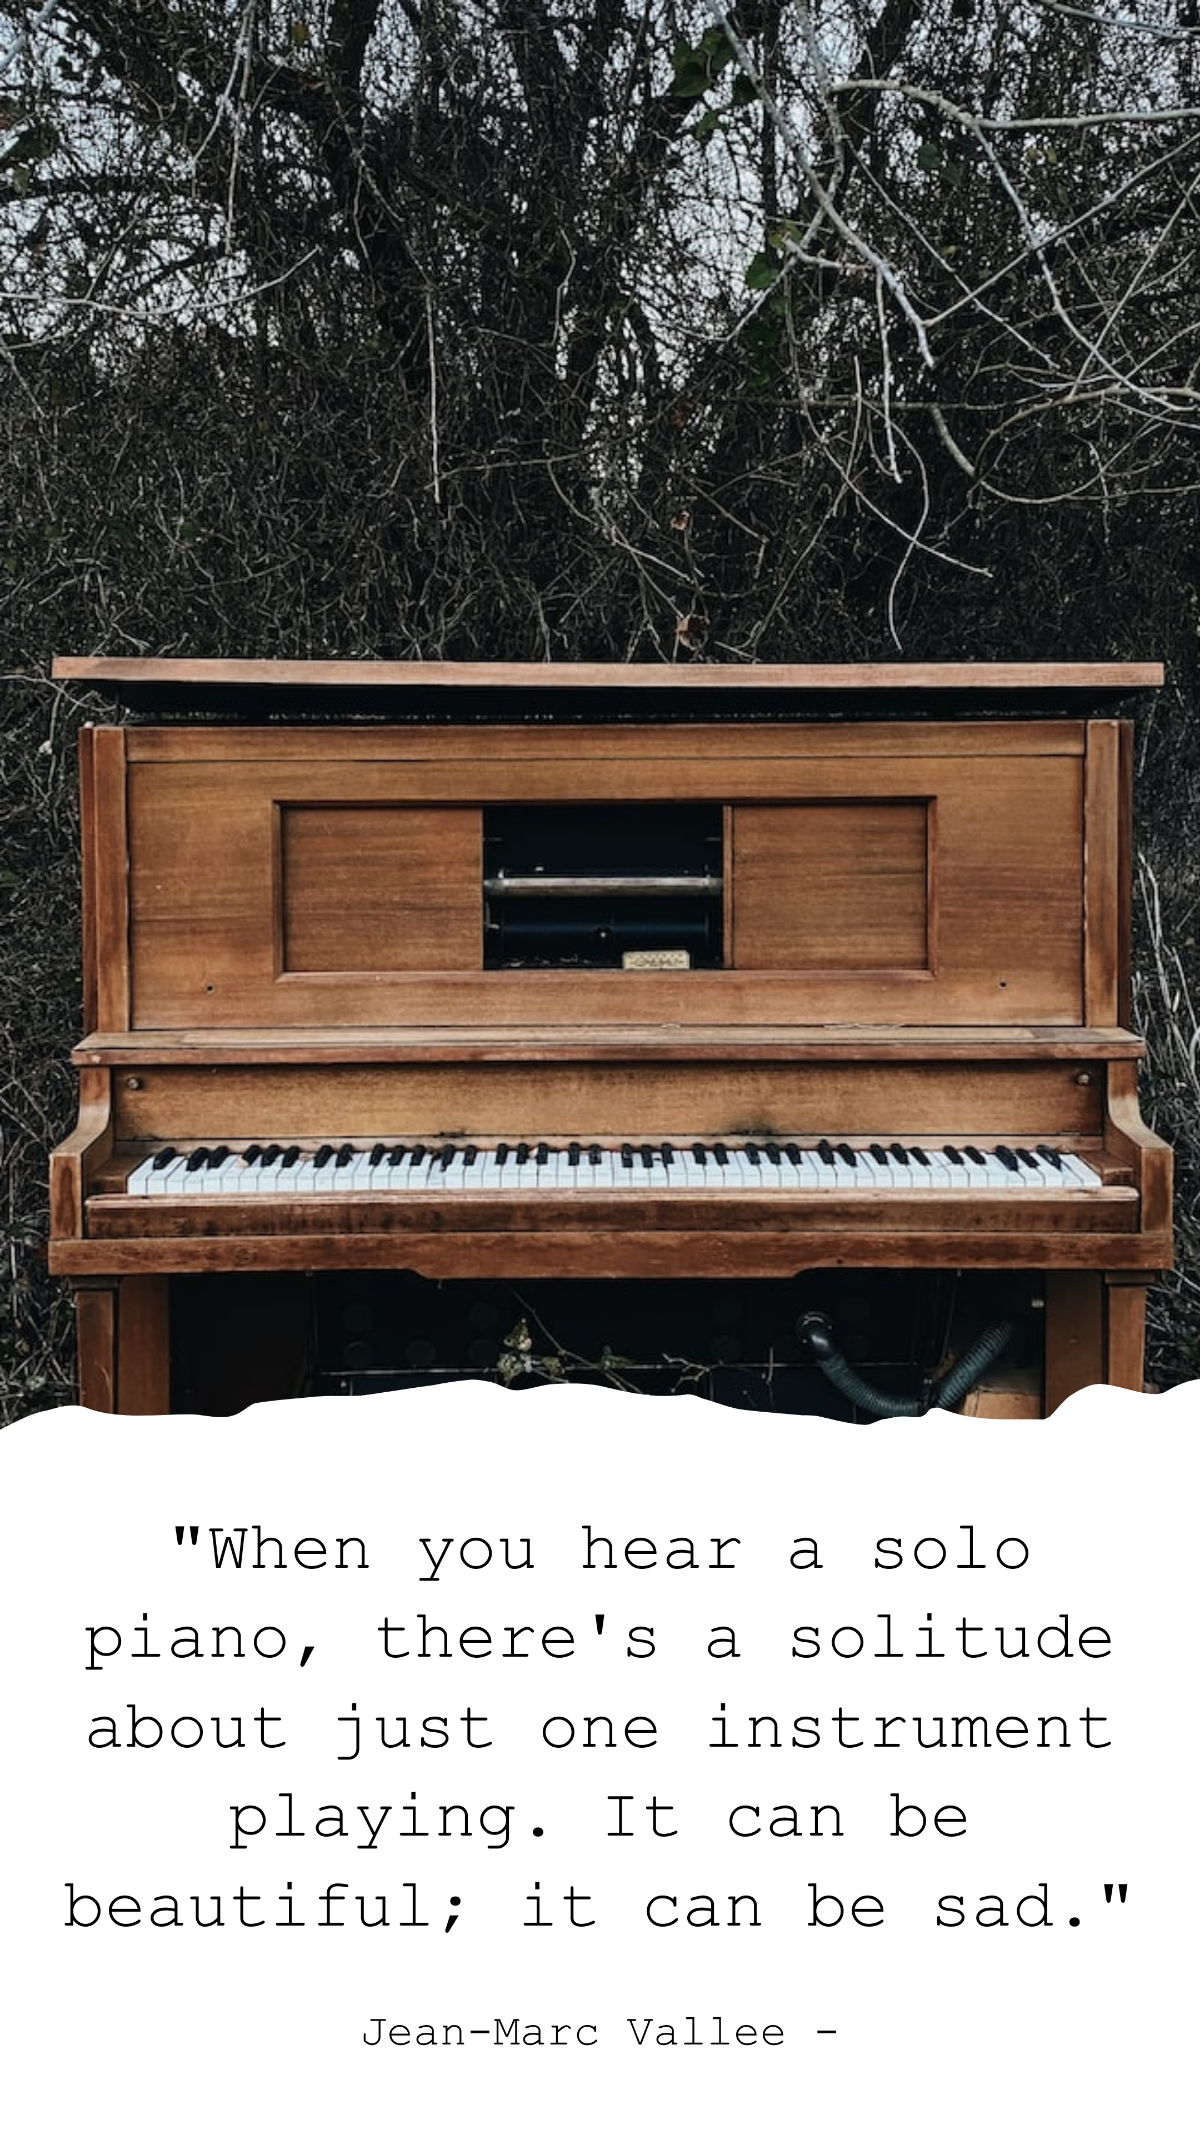 Jean-Marc Vallee - When you hear a solo piano, there's a solitude about just one instrument playing. It can be beautiful; it can be sad. Template